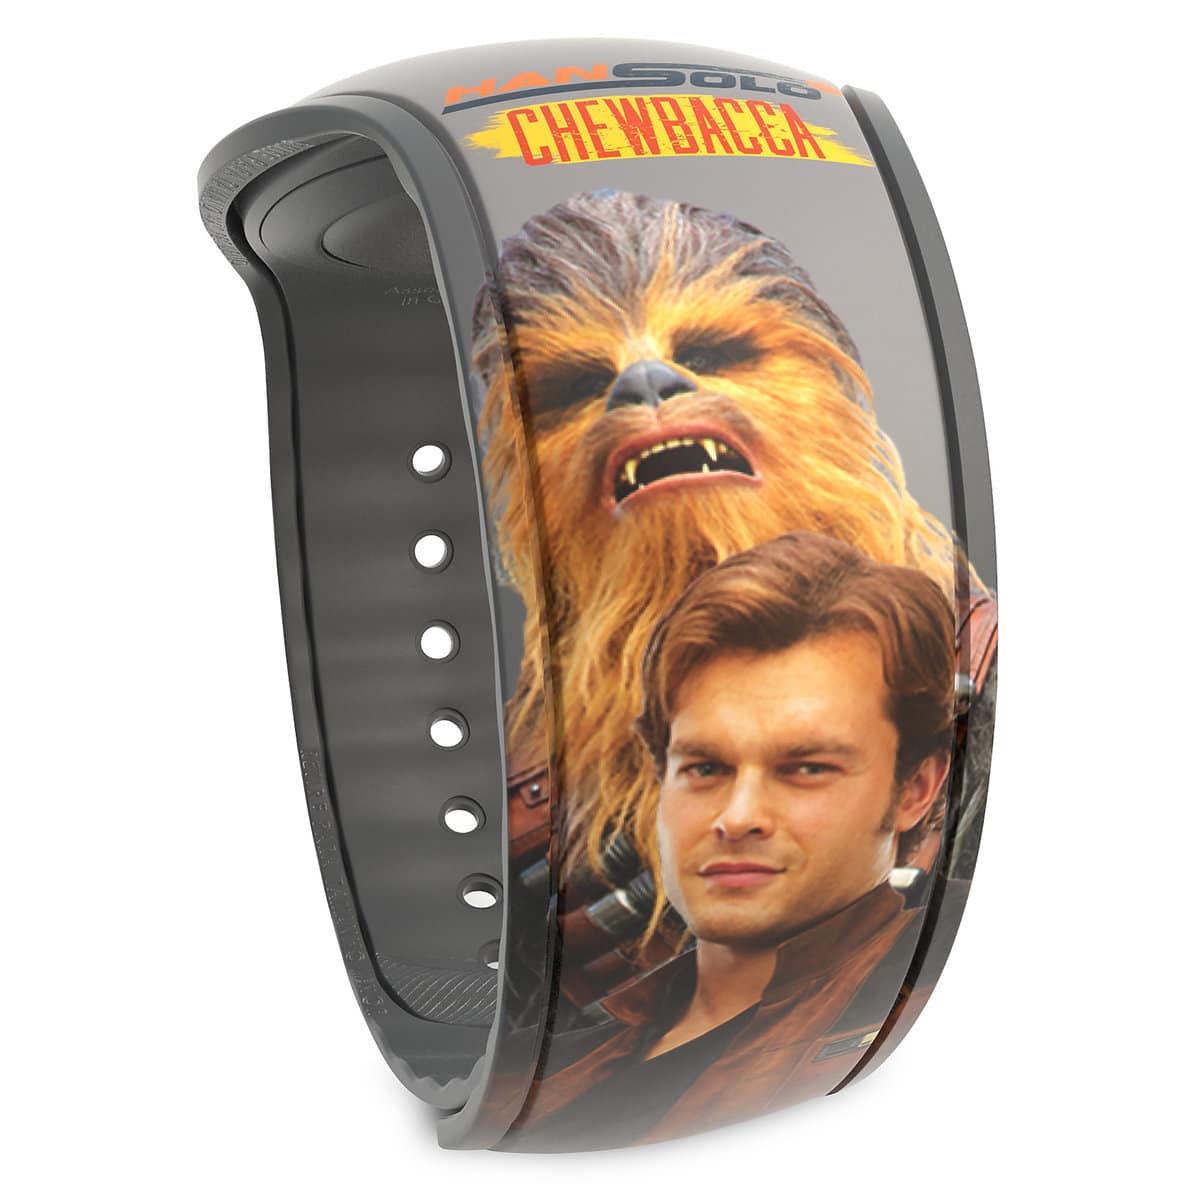 Han Solo and Chewbacca MagicBand 2 - Solo: A Star Wars Story